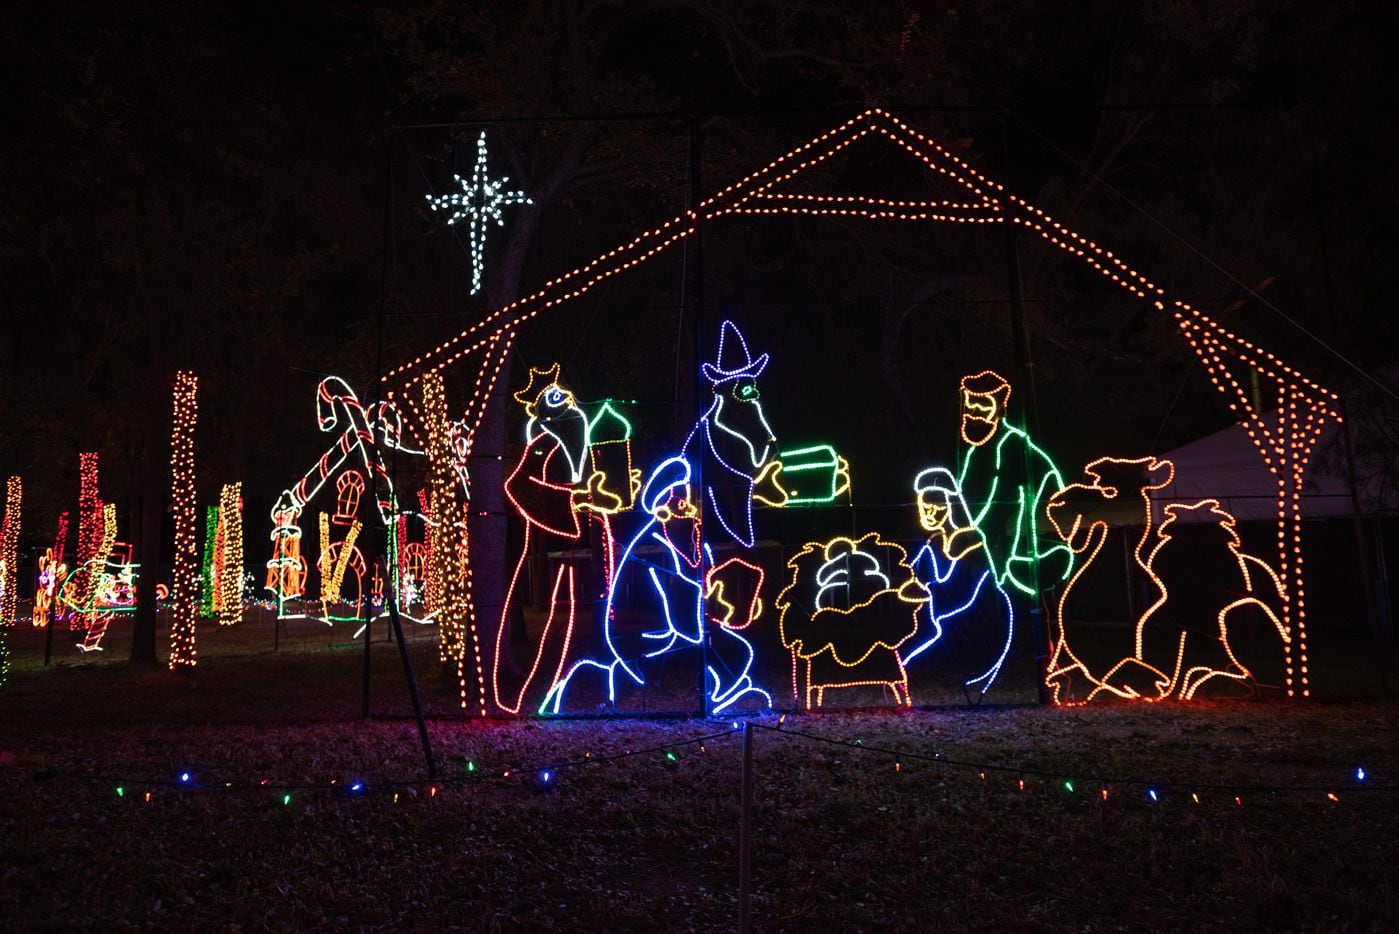 Prairie Lights drive-through holiday attraction has 4 million lights twinkling along a 2-mile path, plus a walk-through Holiday Village with activities.